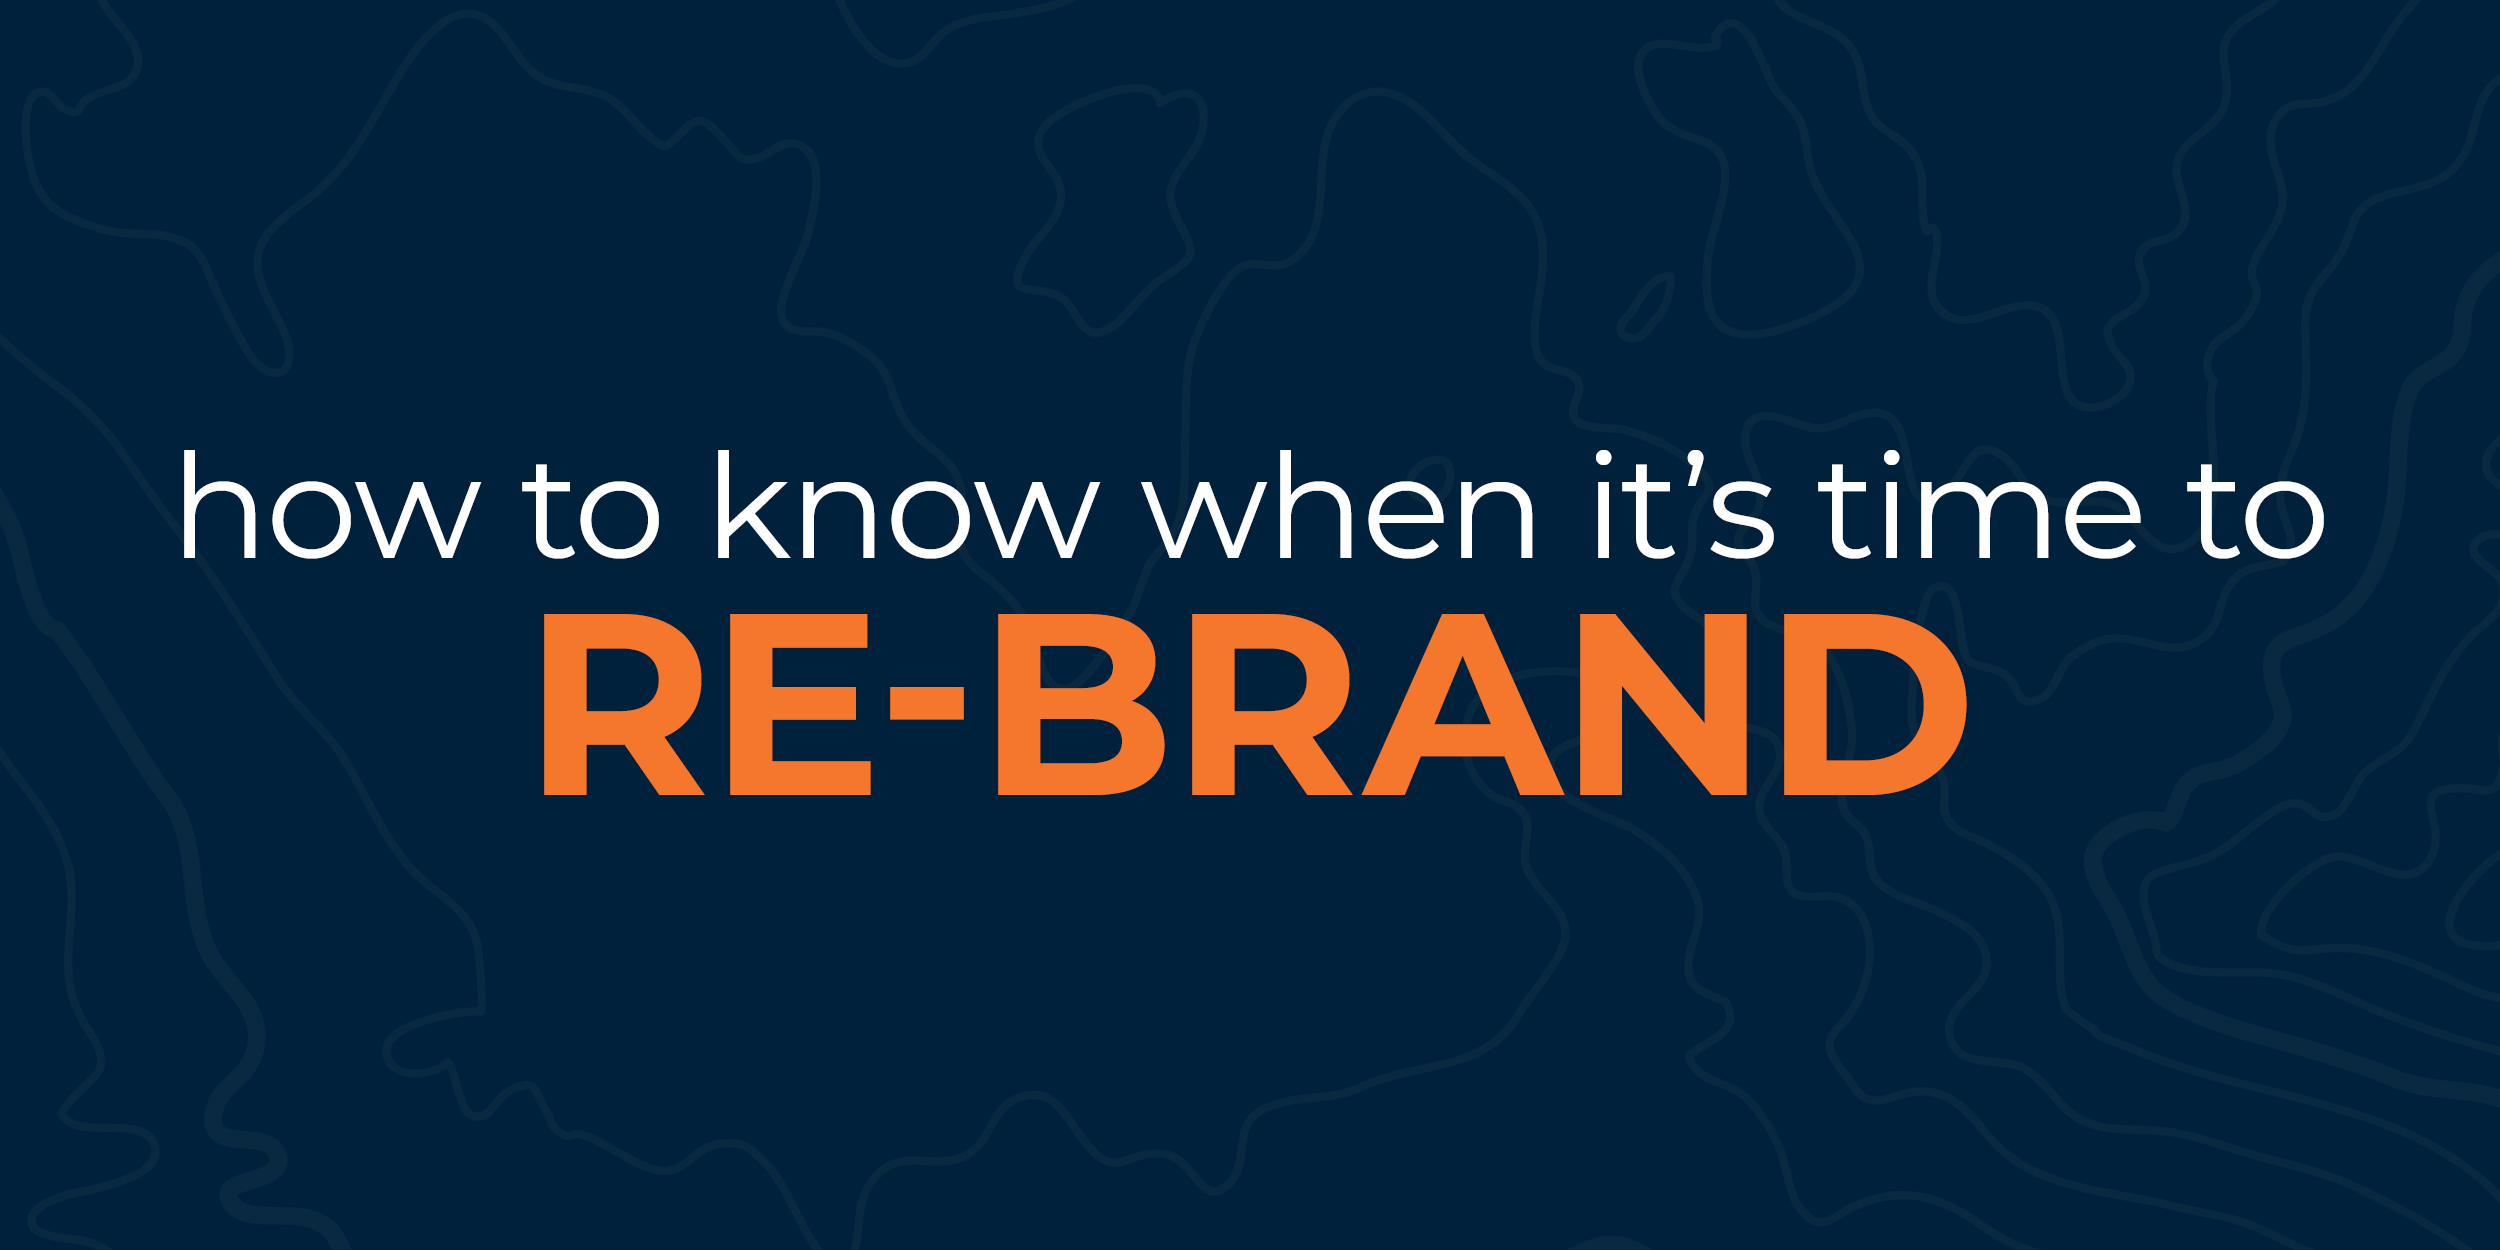 How to know when it's time to re-brand